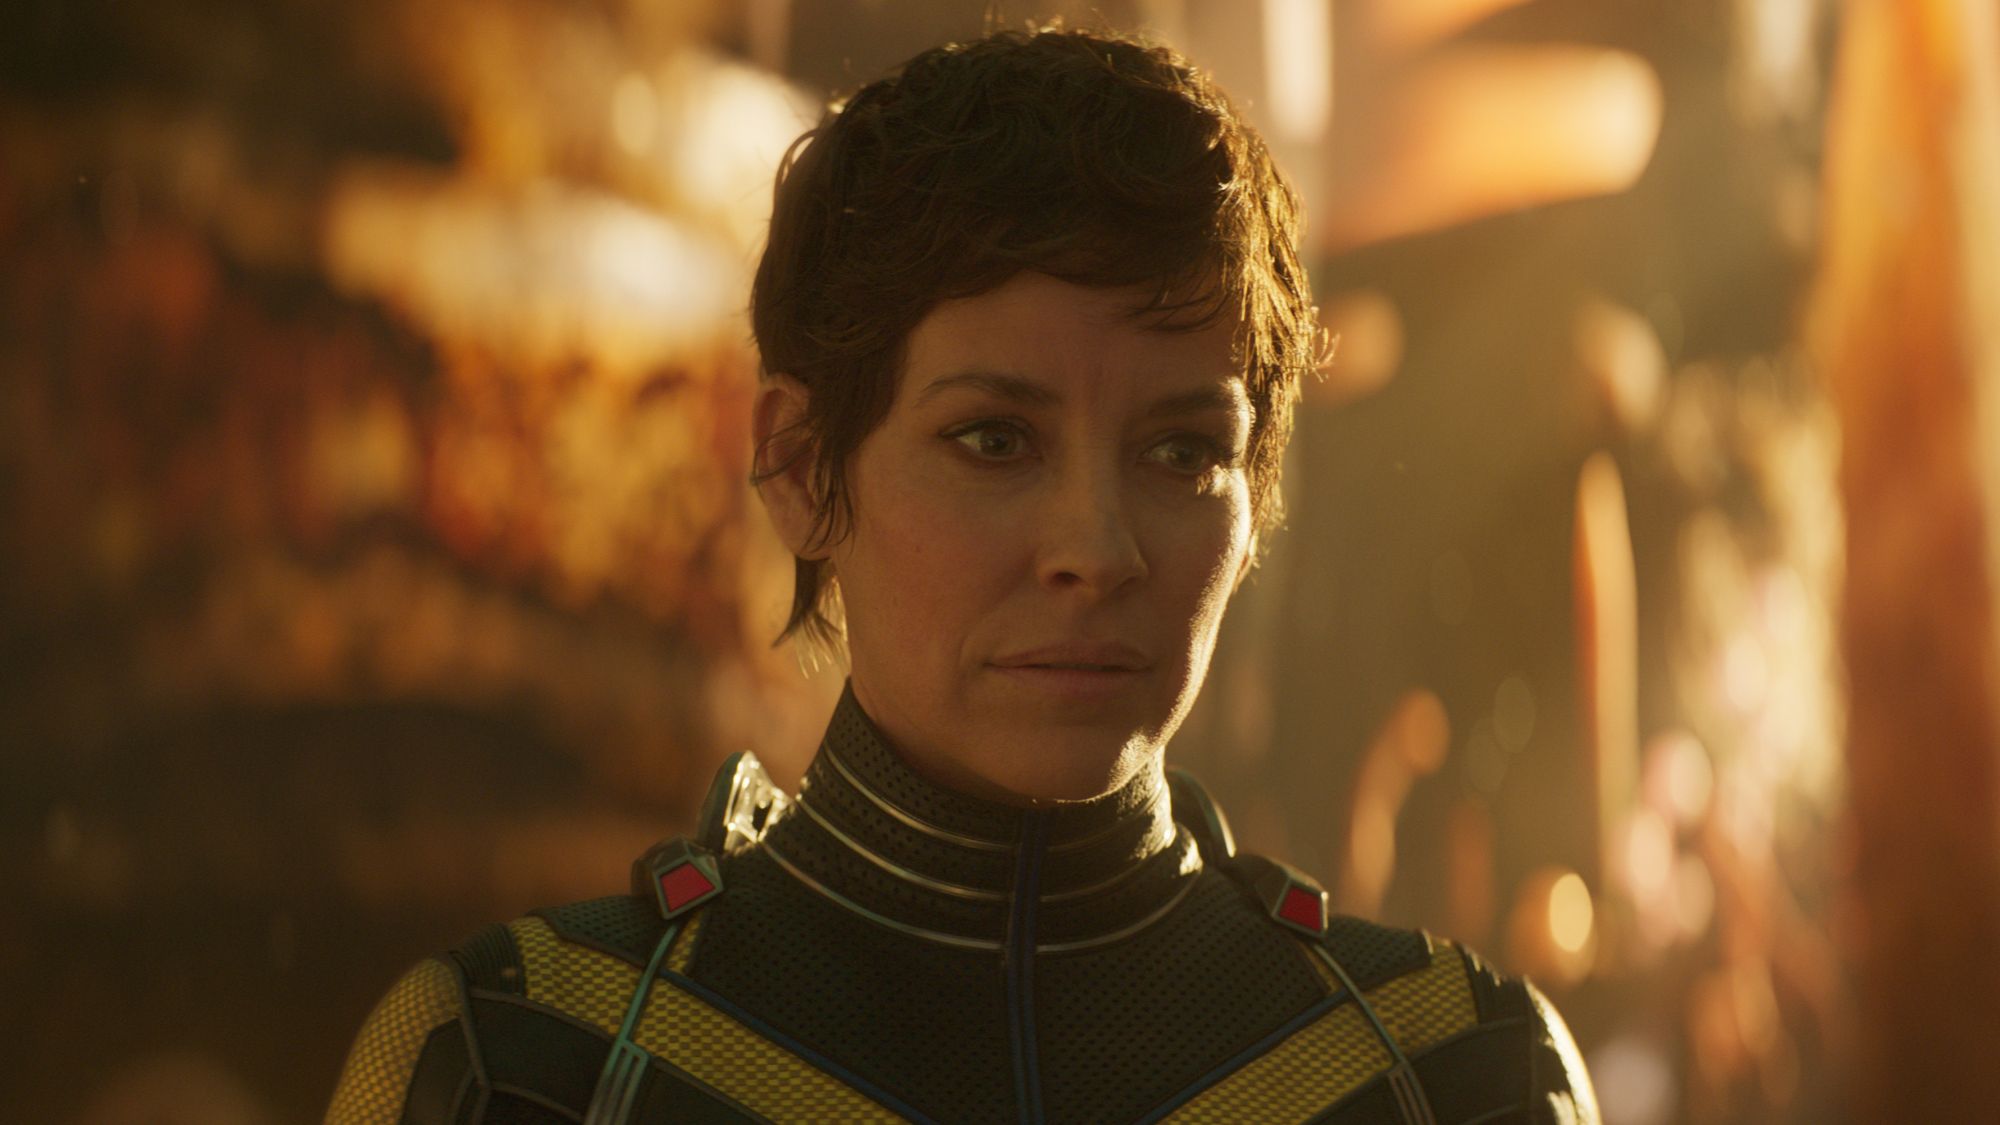 Evangeline Lilly Says Her Kids Think She's 'Cool' for Playing The Wasp